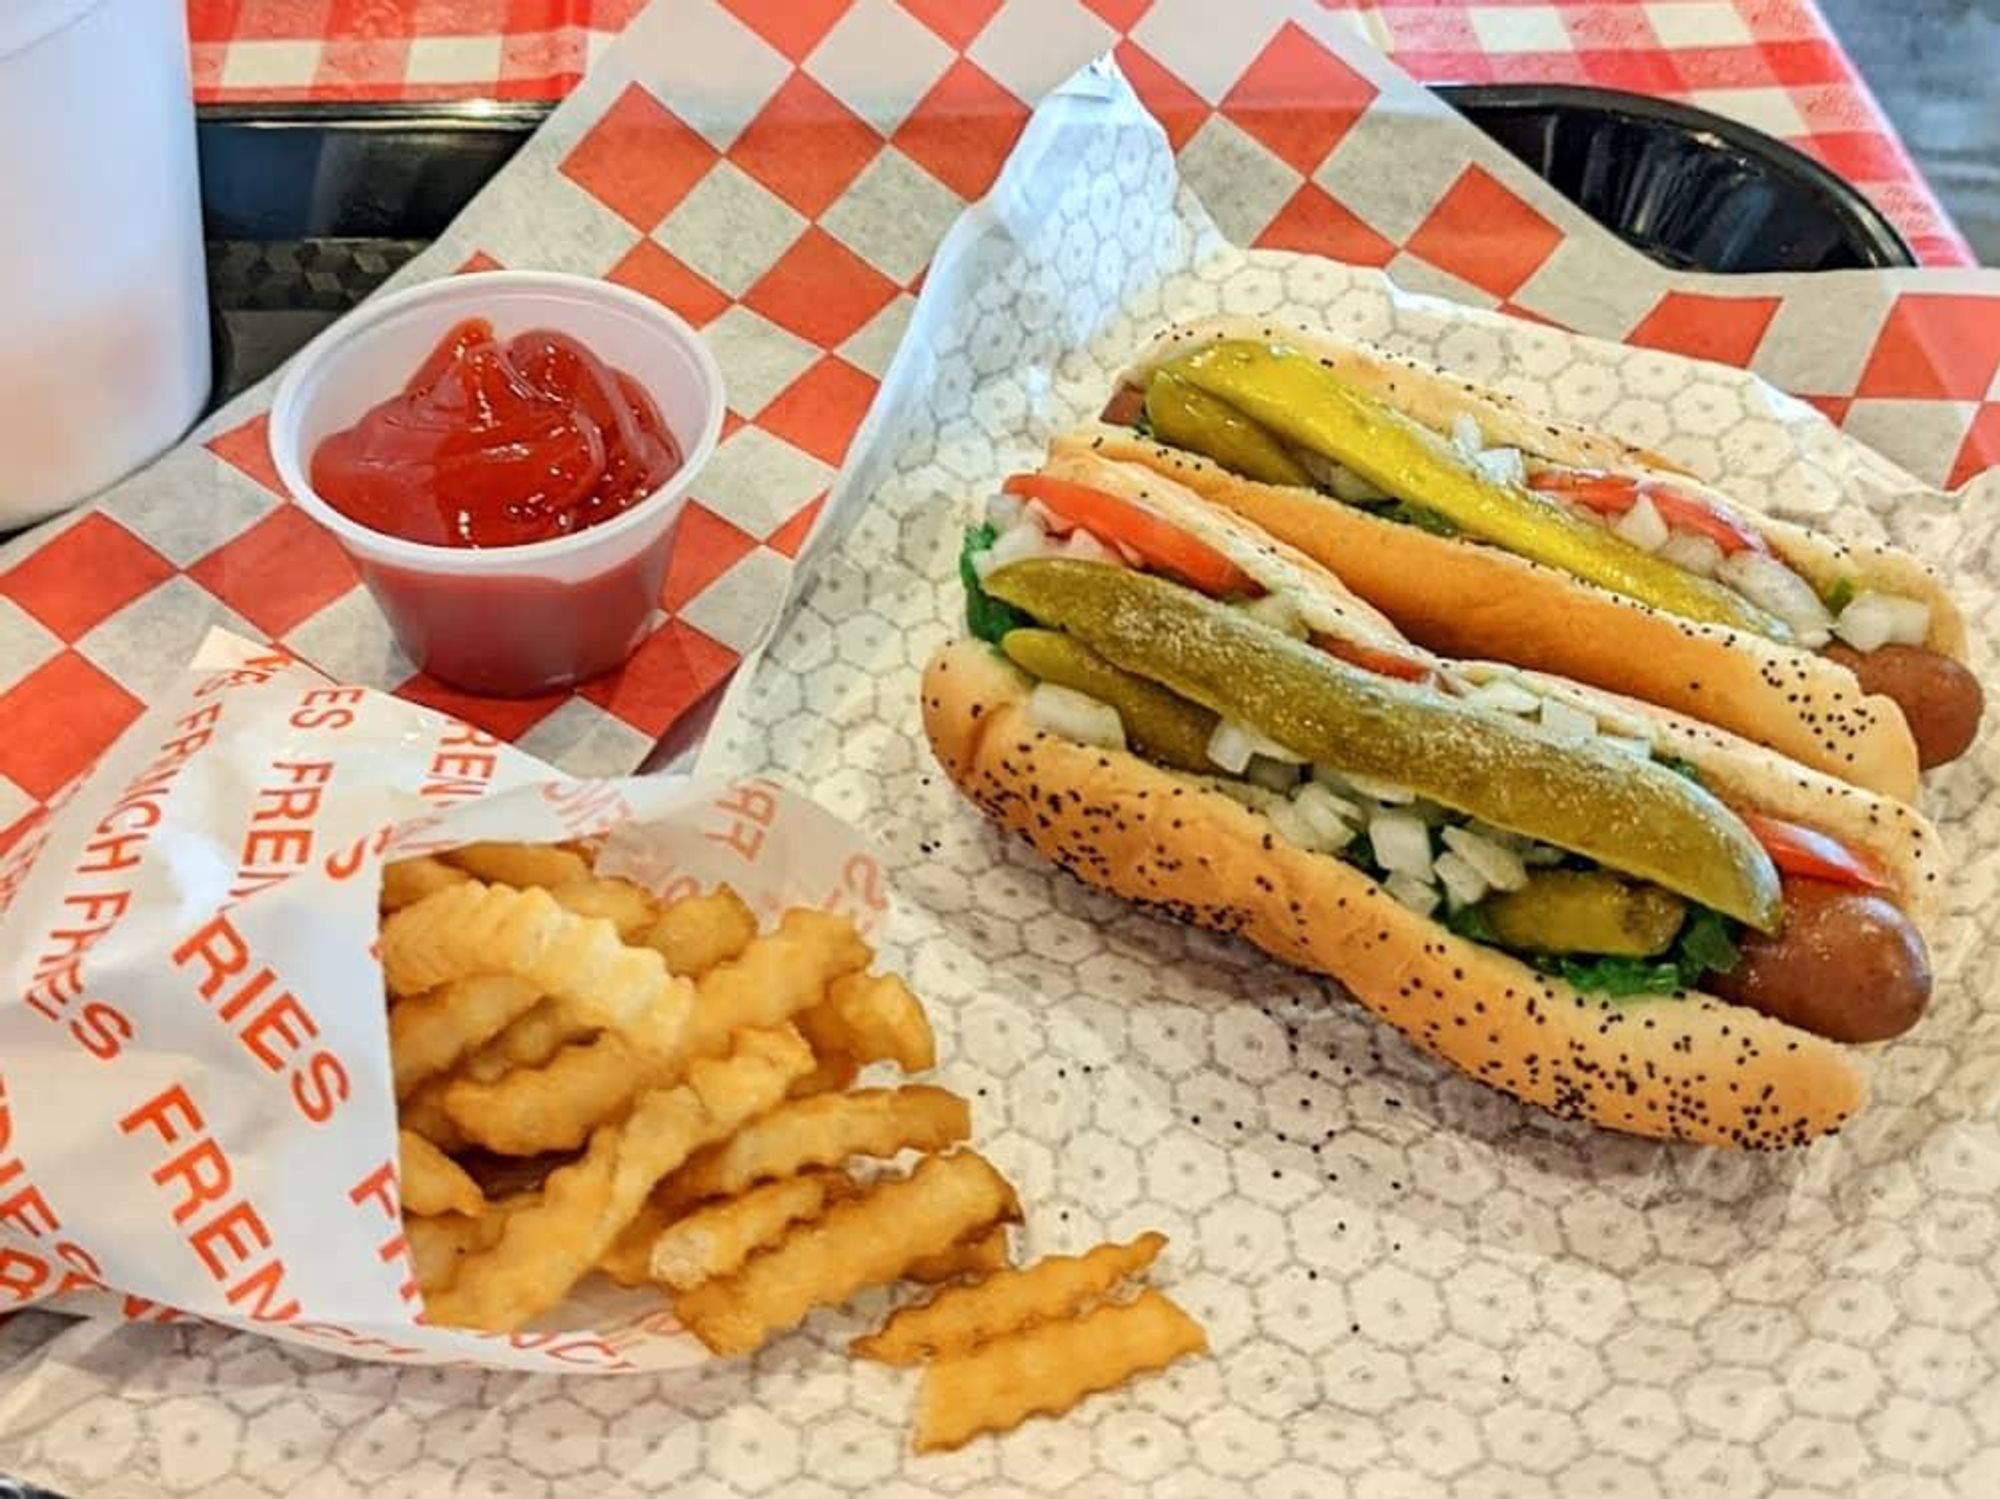 Chicago-style hot dog fanatics have a new indie spot to try in Frisco -  CultureMap Dallas